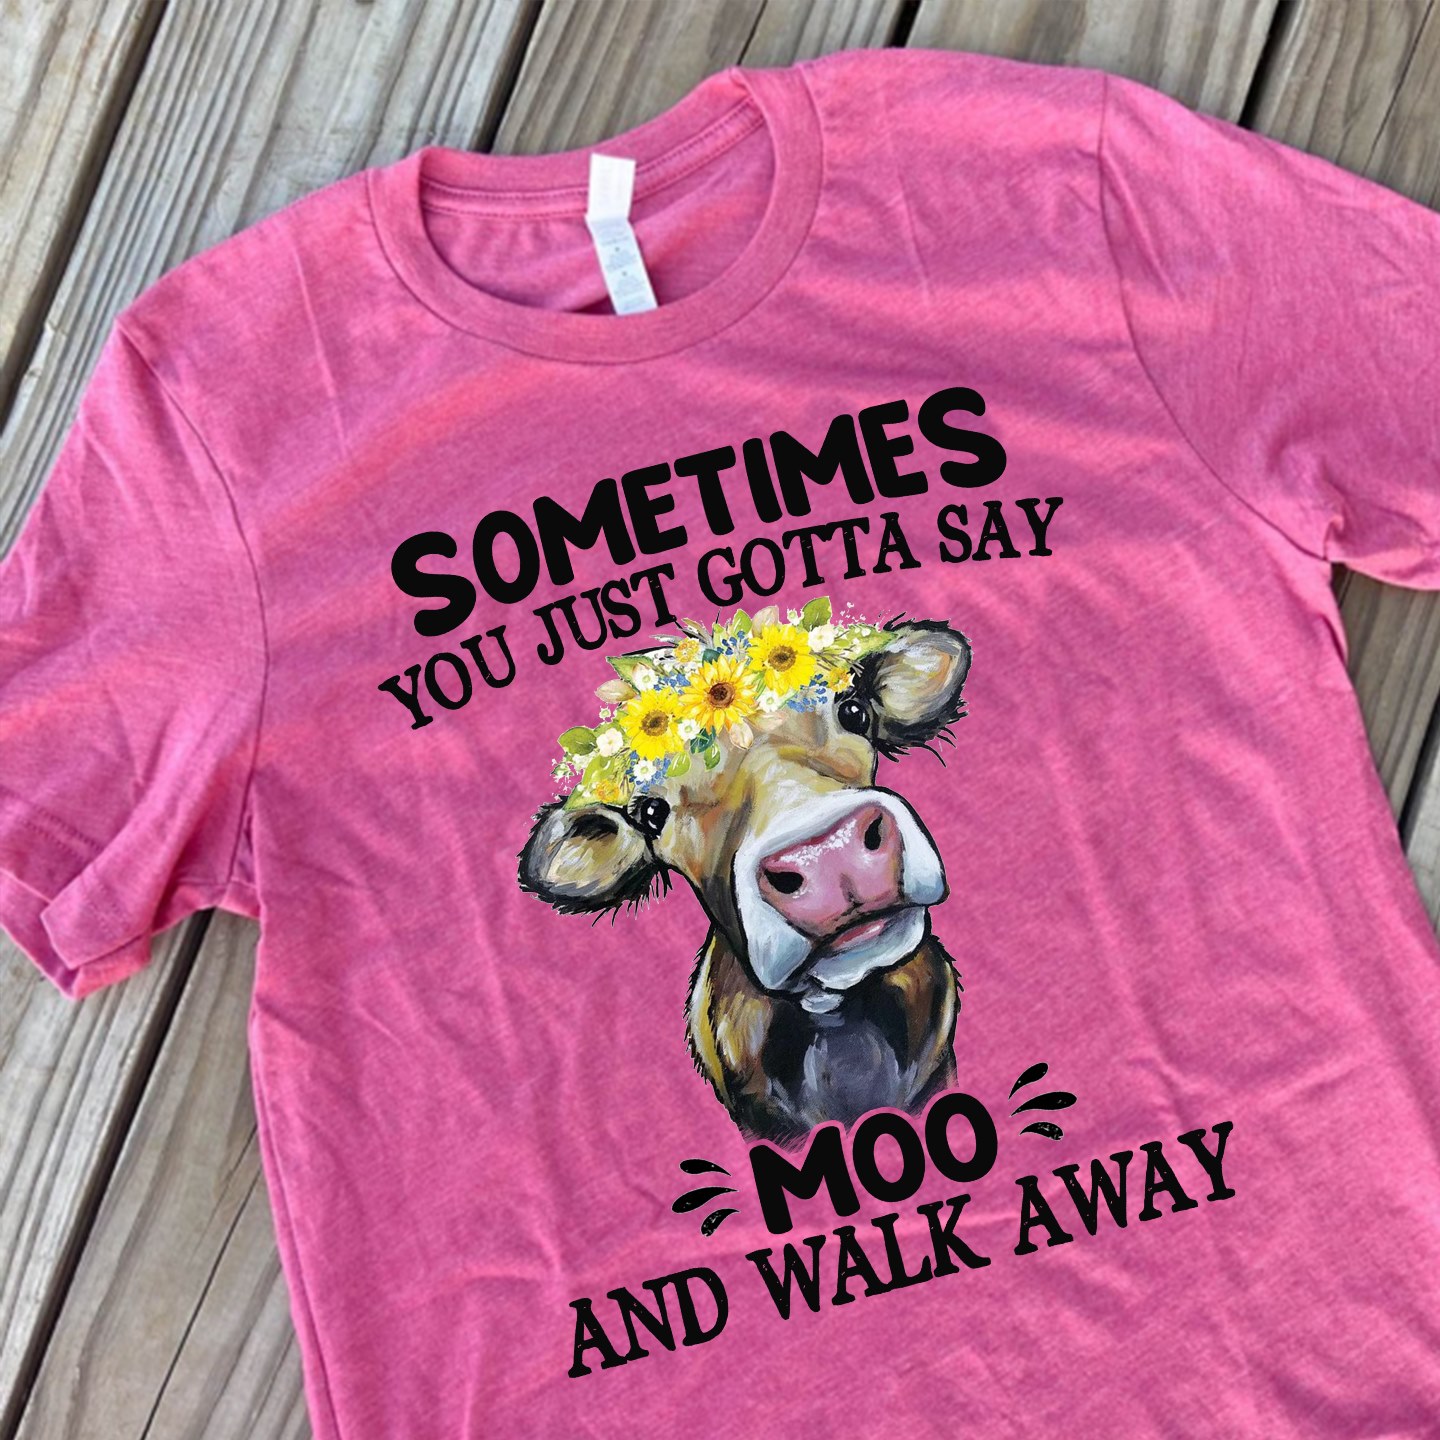 Sometimes you just gotta say Moo and walk away - The cow